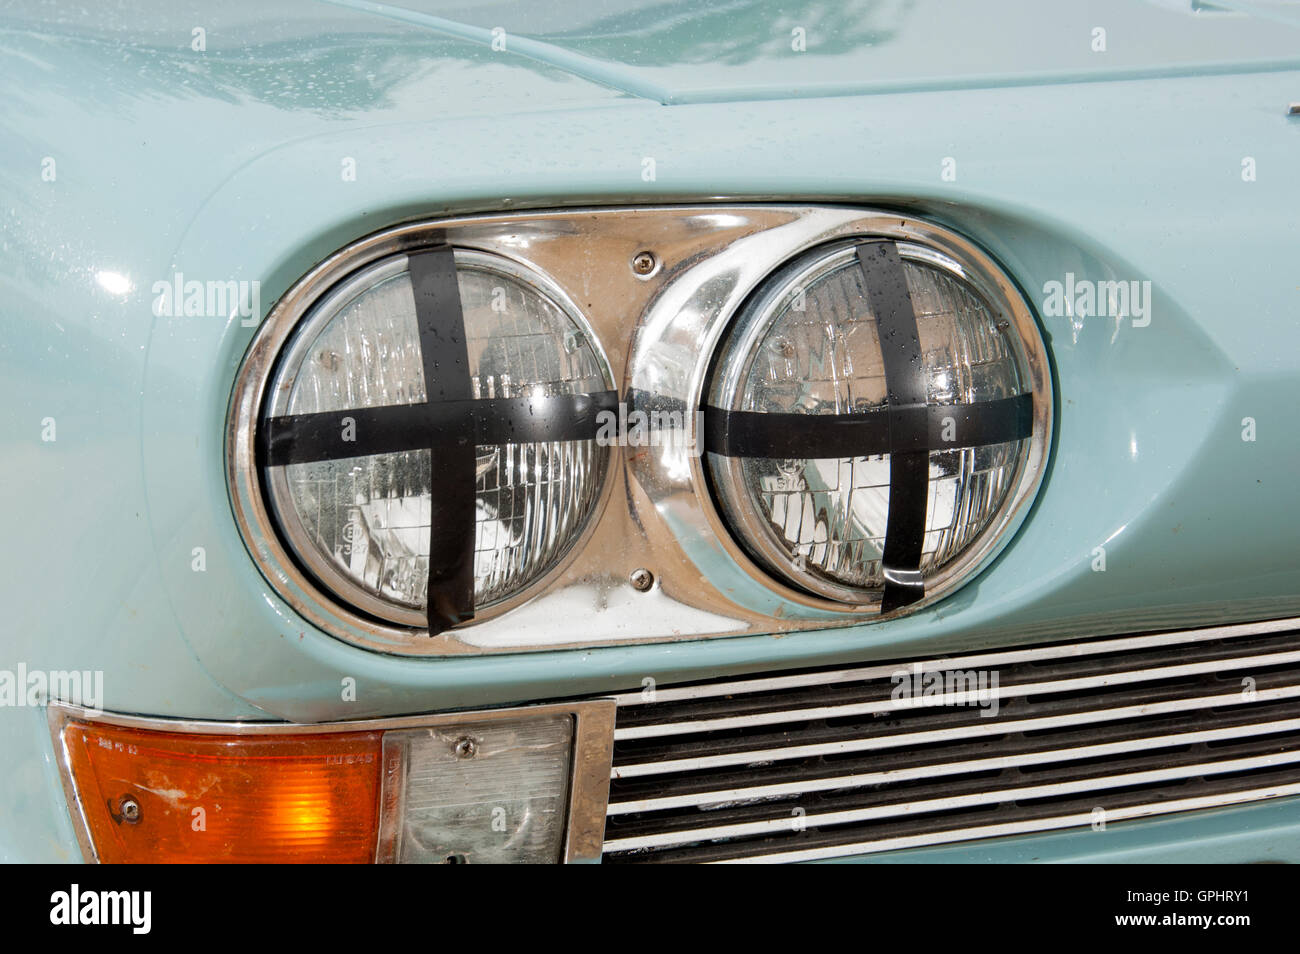 1966 Triumph 2000 rally classic rally car with headlights taped for  competition Stock Photo - Alamy